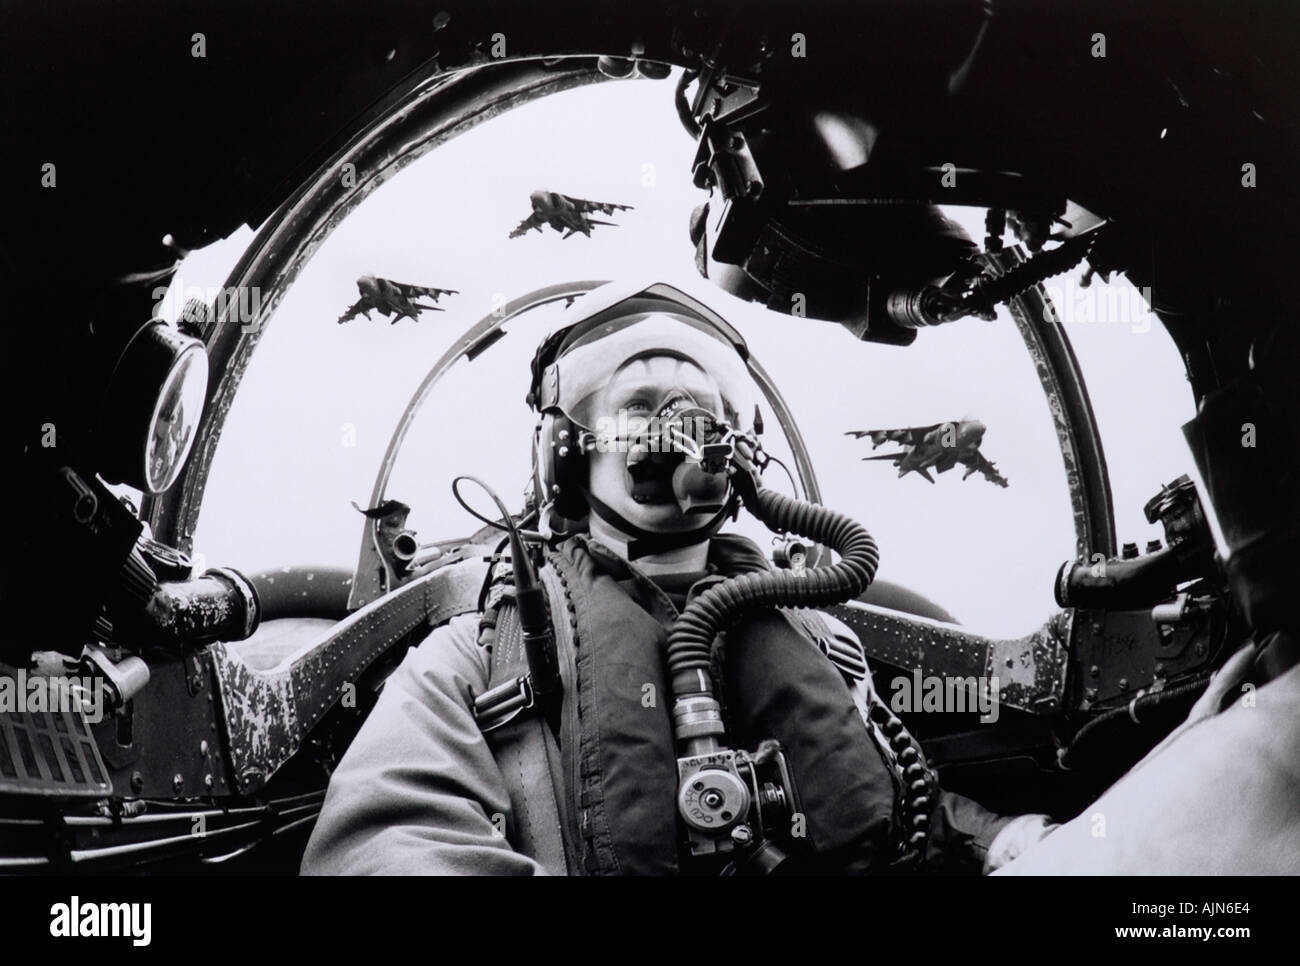 Pilot Officer Bill Auckland at the controls of an RAF Harrier GR3 VTOL jet fighter with GR5 versions flying overhead. Stock Photo